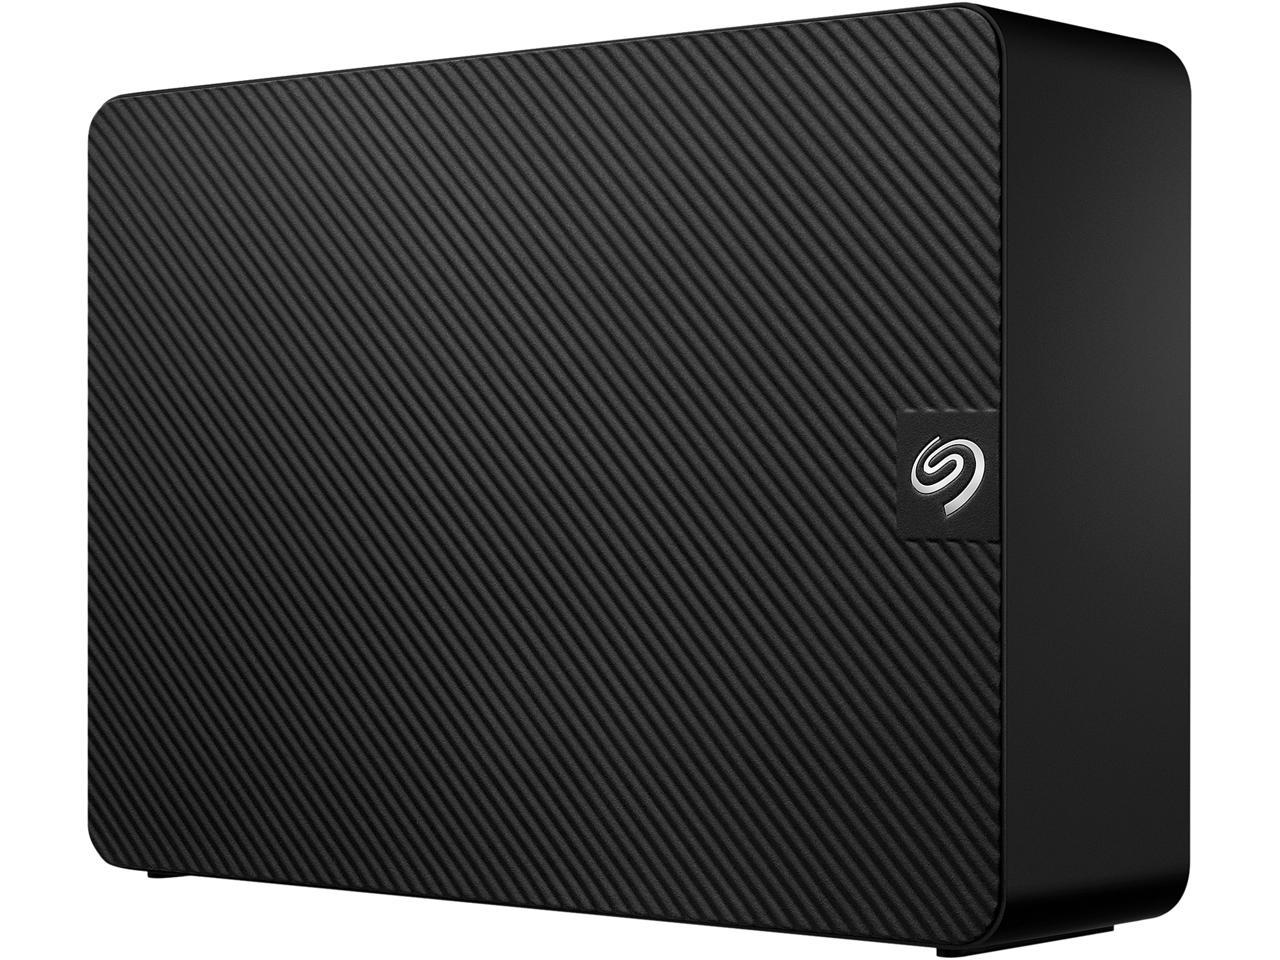 10TB Seagate Expansion 3.5" Desktop Hard Drive with Rescue Data Recovery Services (STKP10000400) $160